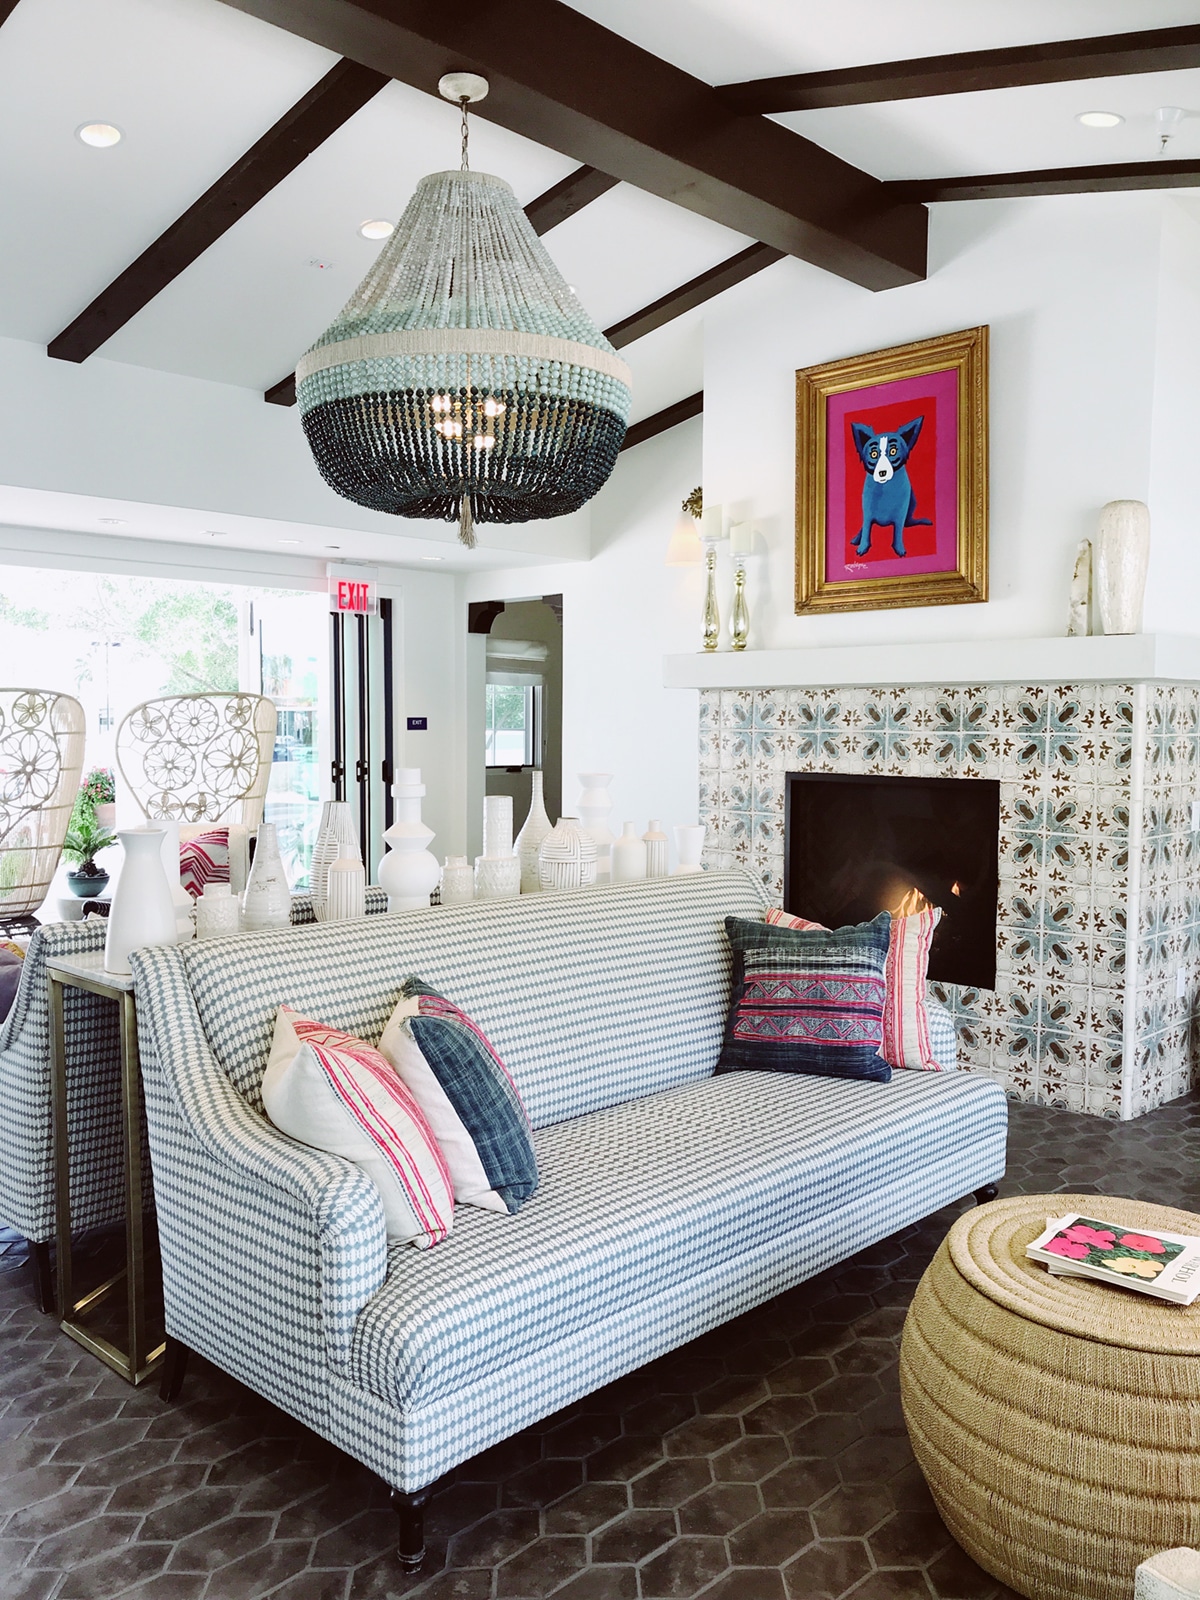 an eclectic mix at the reception area | tour of la serena villas palm springs on coco kelley